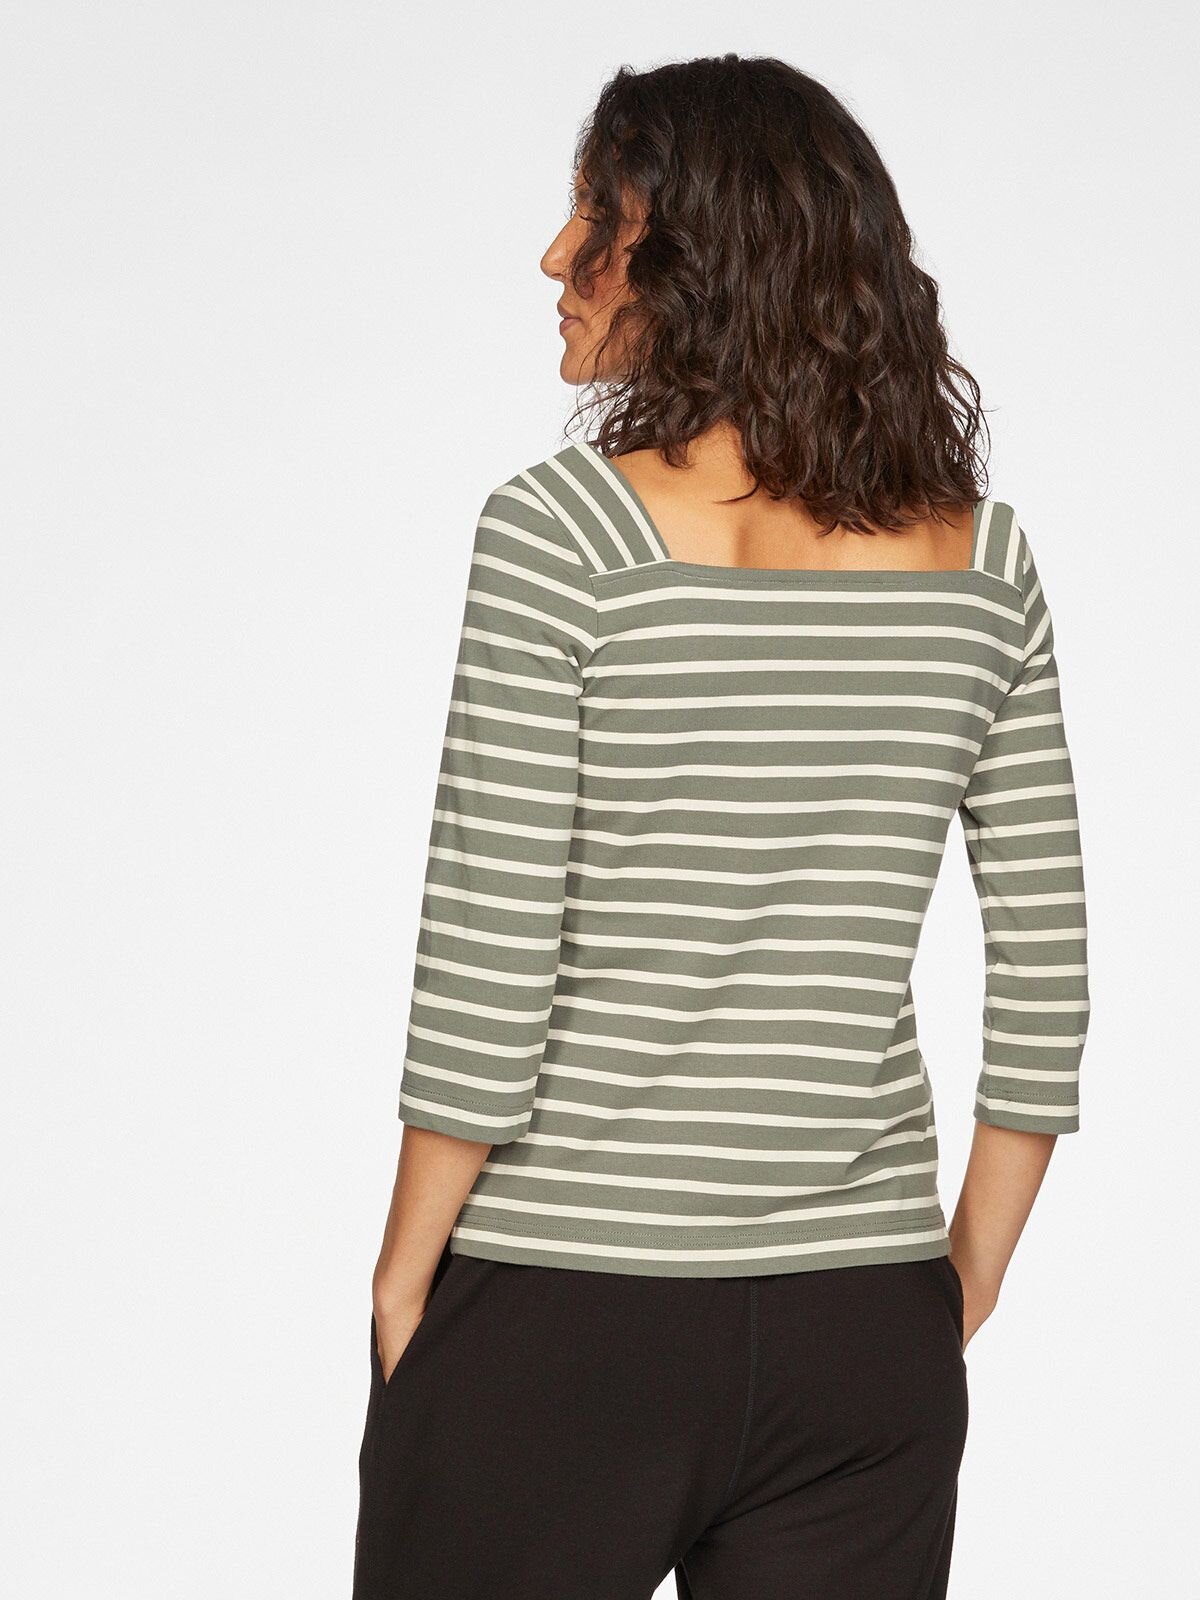 WST5394-SAGE-GREEN--Nell-Striped-Organic-Cotton-Jersey-Top-in-Sage-Green-2.jpg